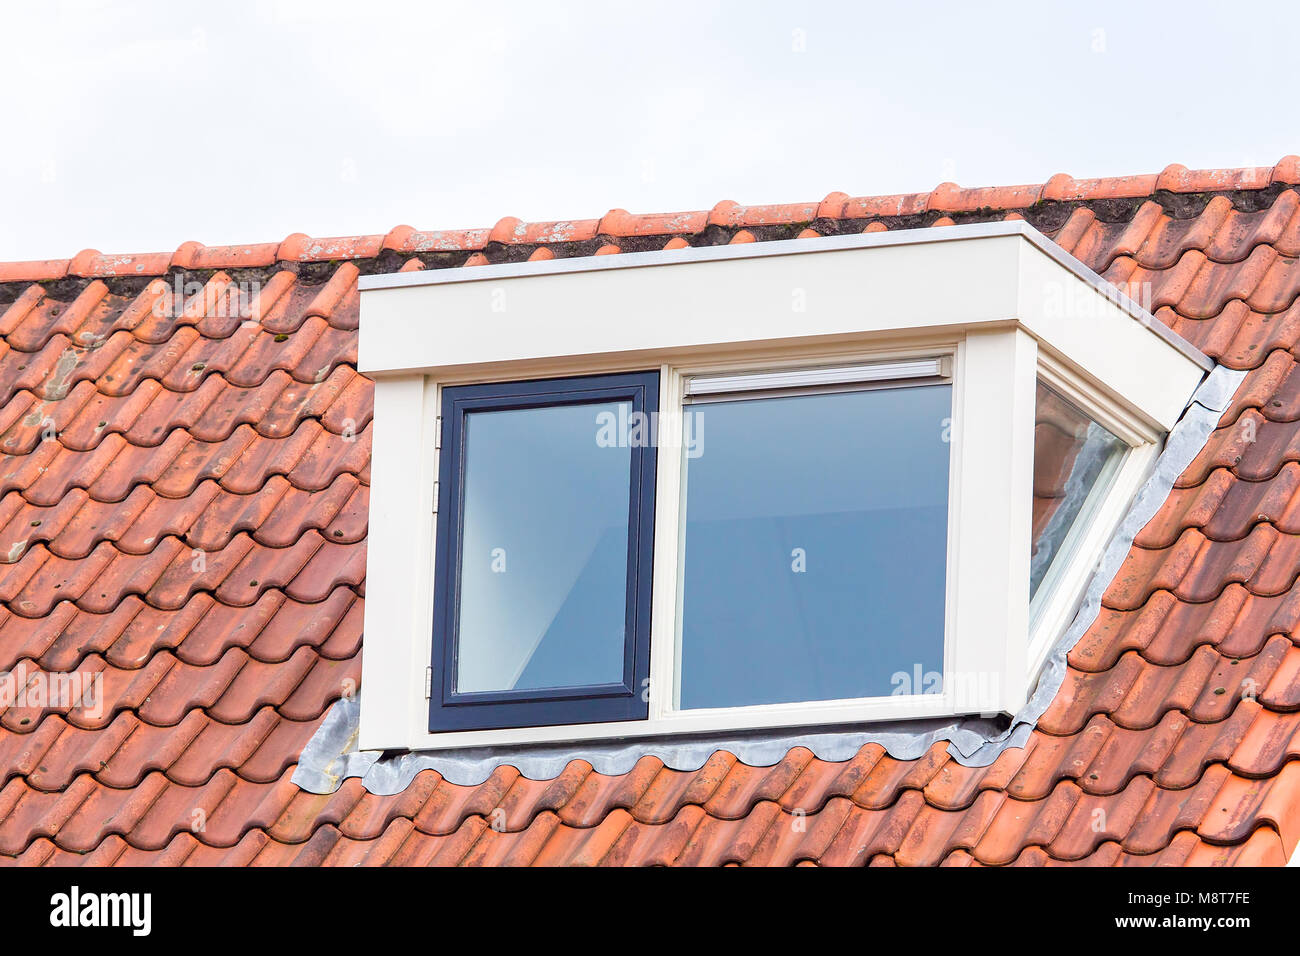 Dormer window on  roof of house with orange roof tiles Stock Photo